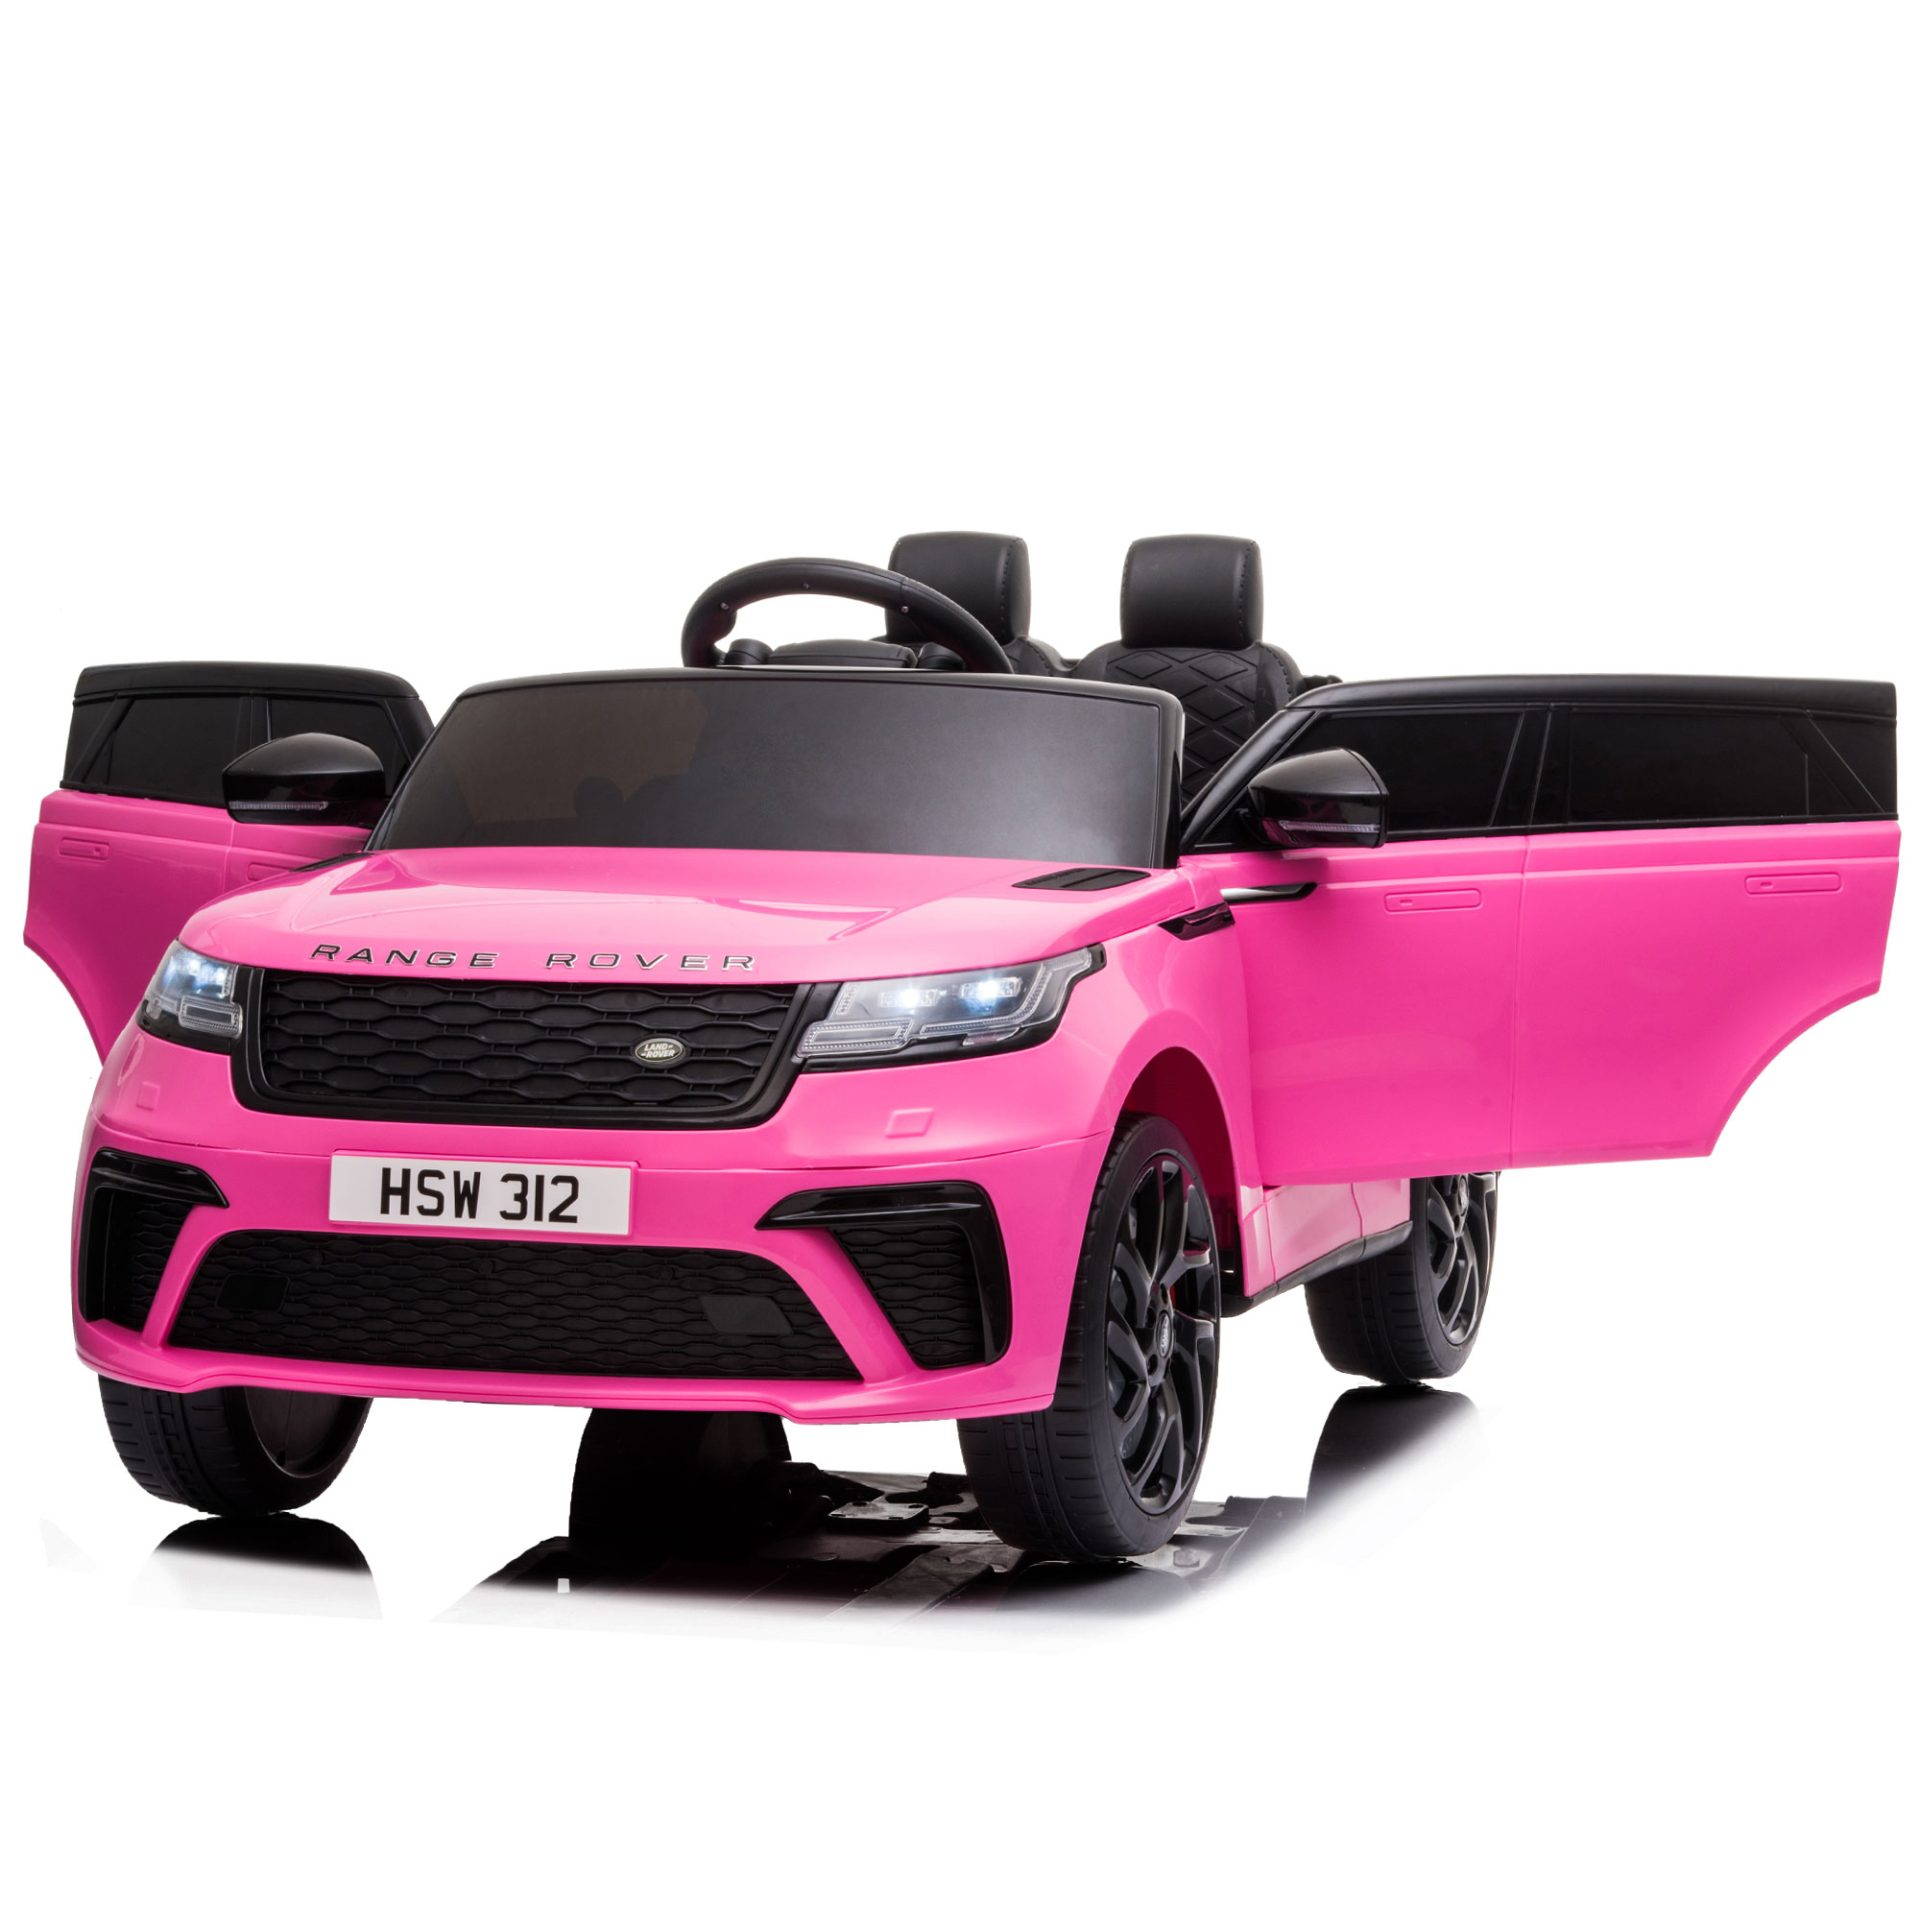 Tobbi 12V Licensed Land Rover VELAR Vehicle, Battery Operated Kids Ride On Car with Parental Remote Control, Aphelocoma TH17M08139